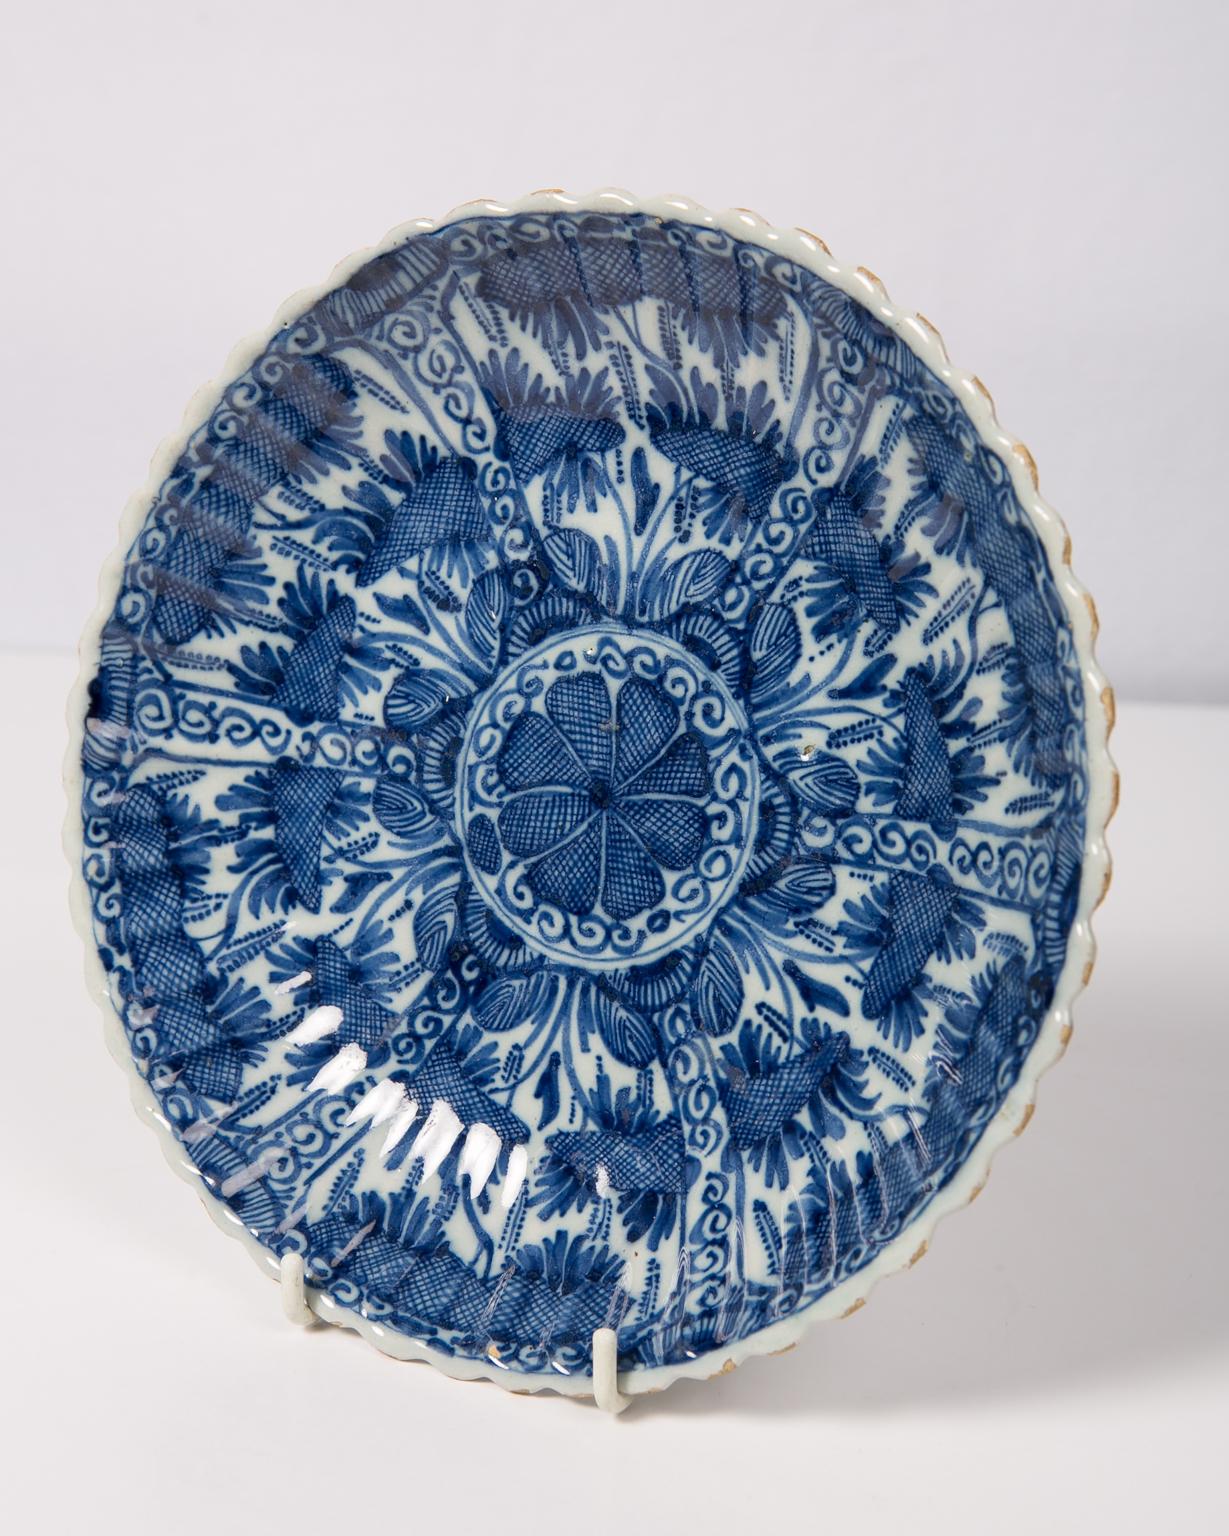 Dutch Antique Delft Blue and White Dish with Fluting and a Scalloped Edge circa 1780